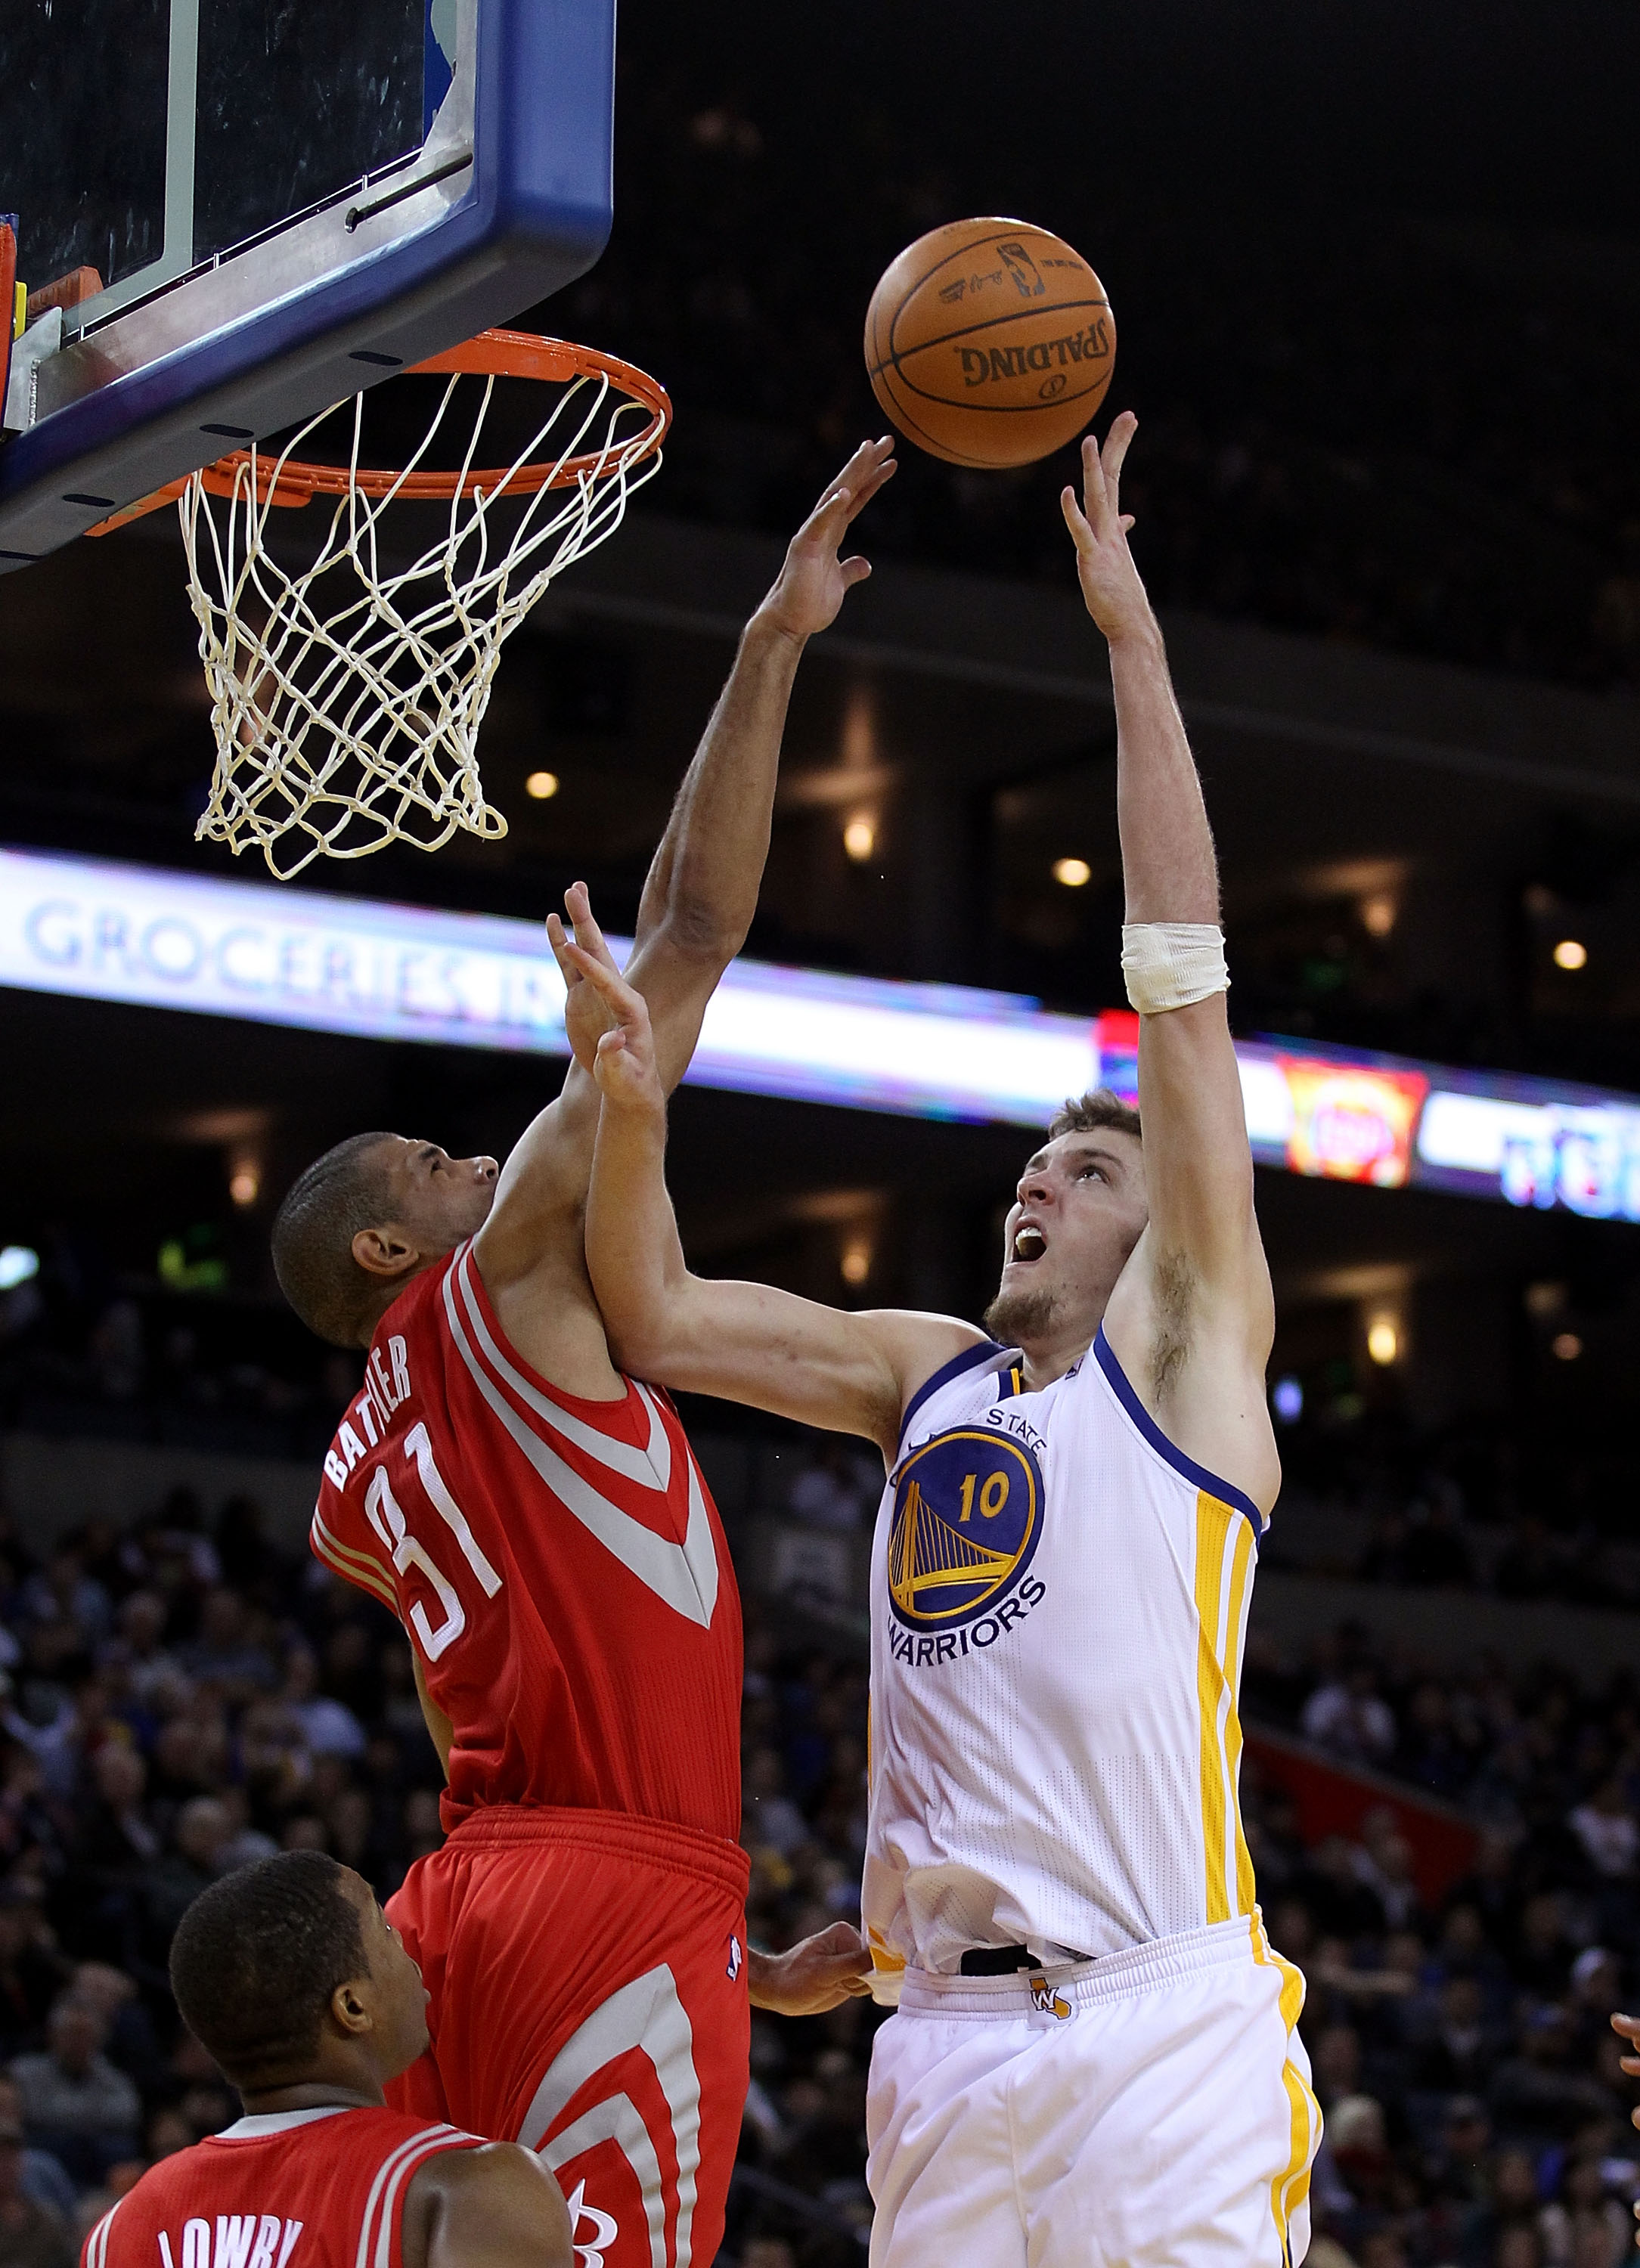 OAKLAND, CA - DECEMBER 20:  David Lee #10 of the Golden State Warriors shoots over Shane Battier #31 of the Houston Rockets at Oracle Arena on December 20, 2010 in Oakland, California. NOTE TO USER: User expressly acknowledges and agrees that, by download